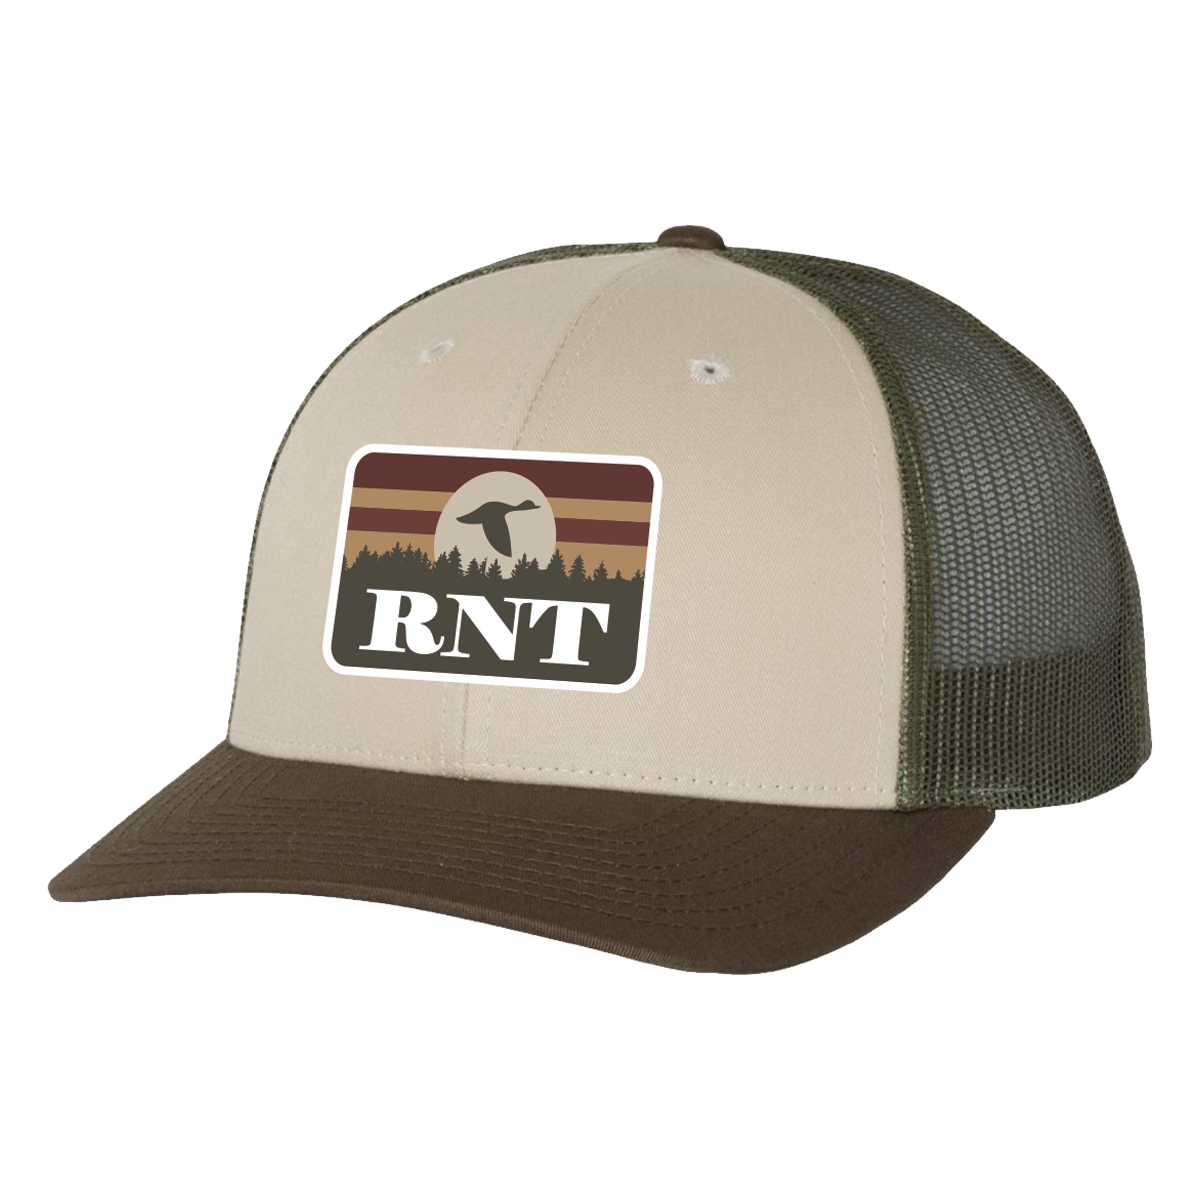 RNT Duck Patch Hat - NEW